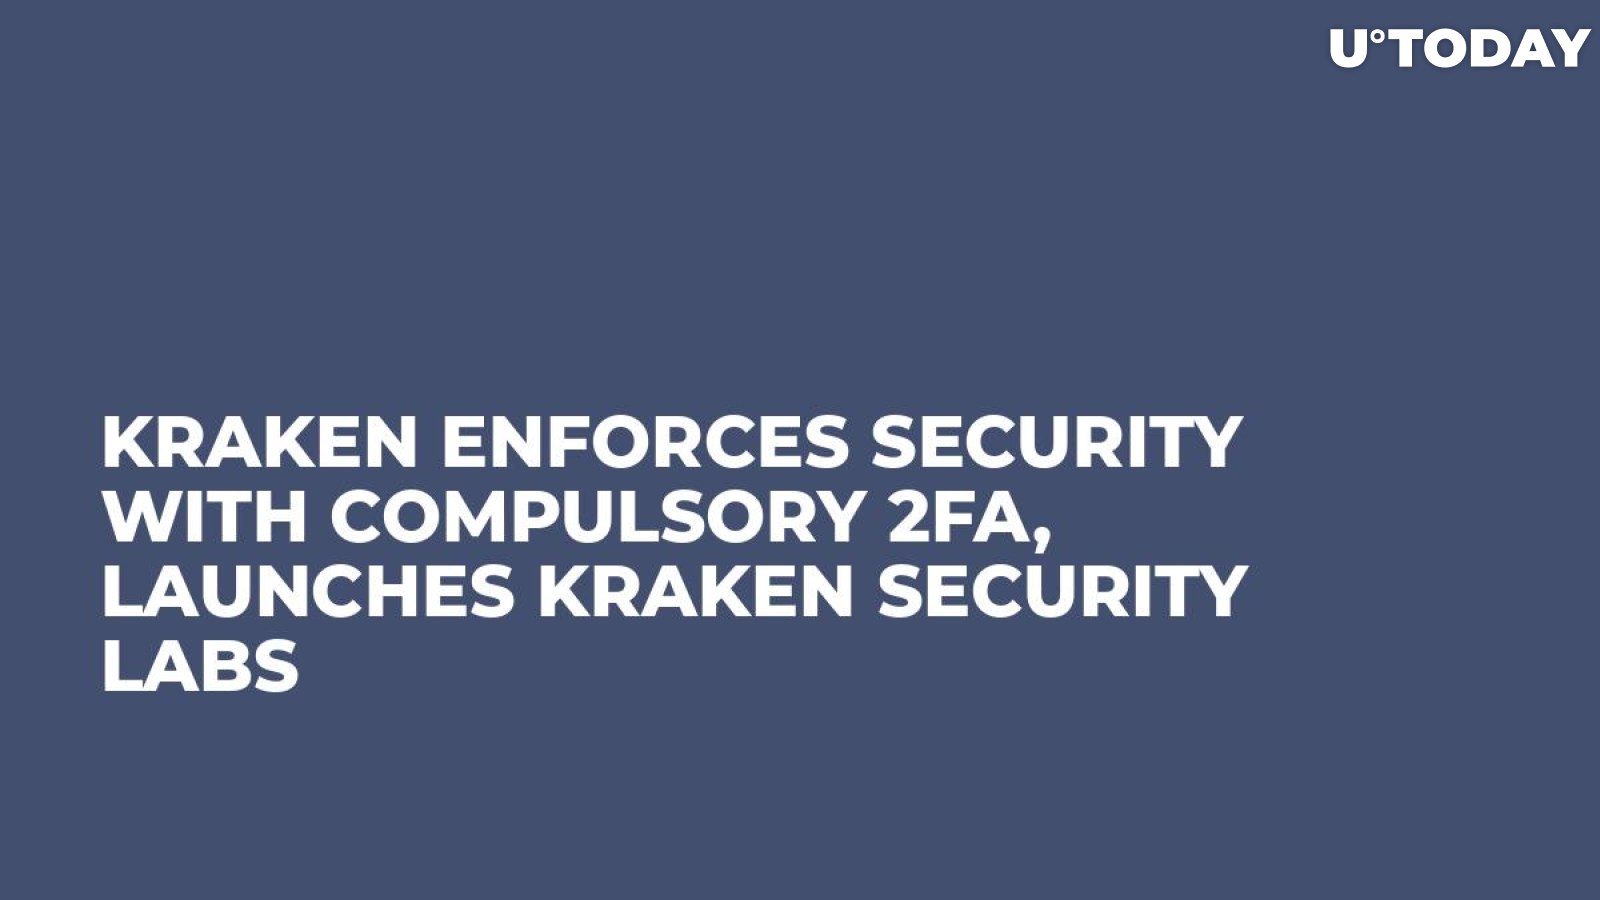 Kraken Enforces Security with Compulsory 2FA, Launches Kraken Security Labs